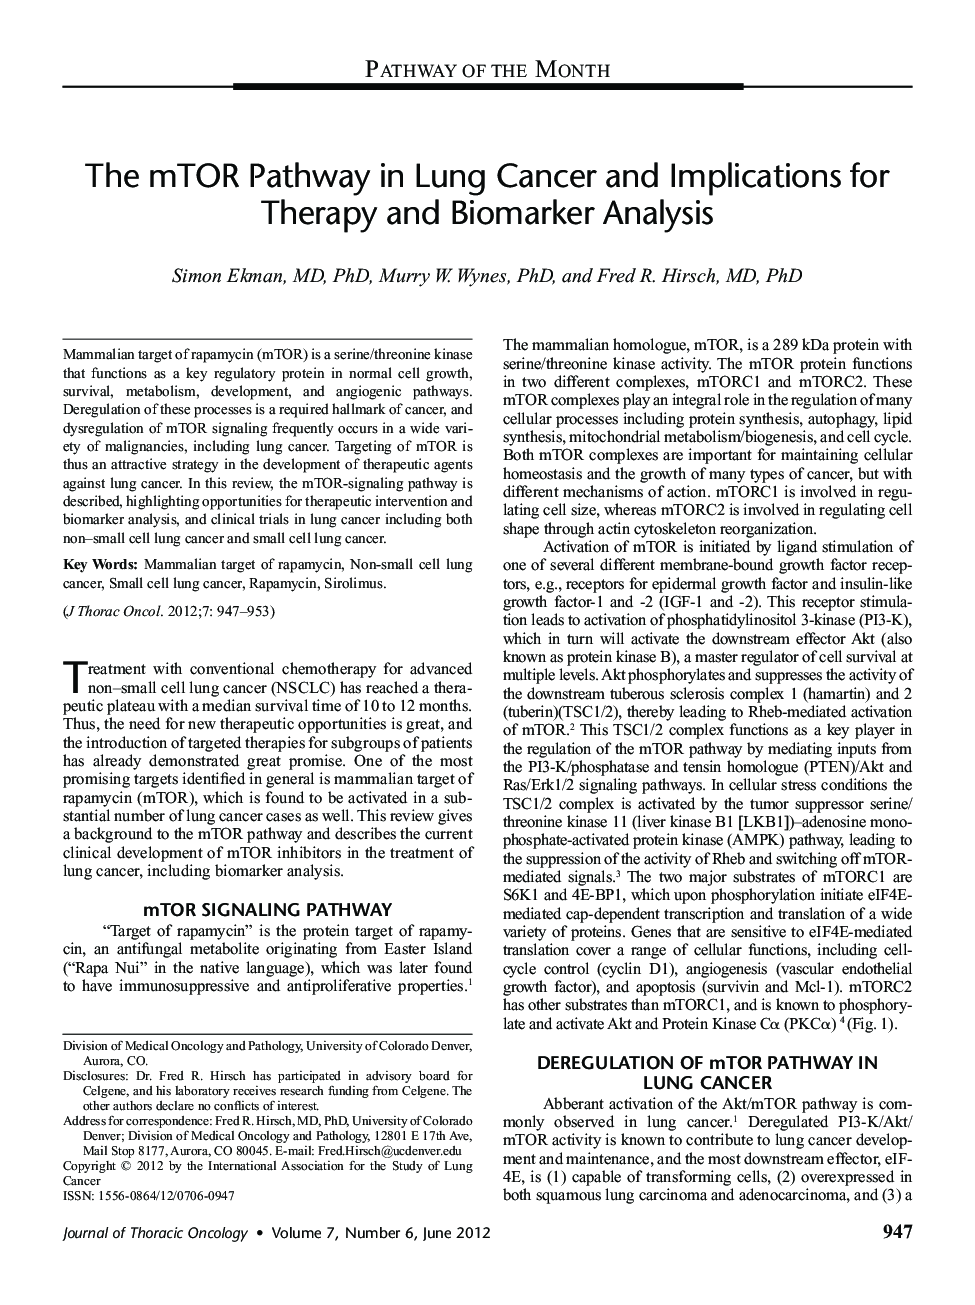 The mTOR Pathway in Lung Cancer and Implications for Therapy and Biomarker Analysis 